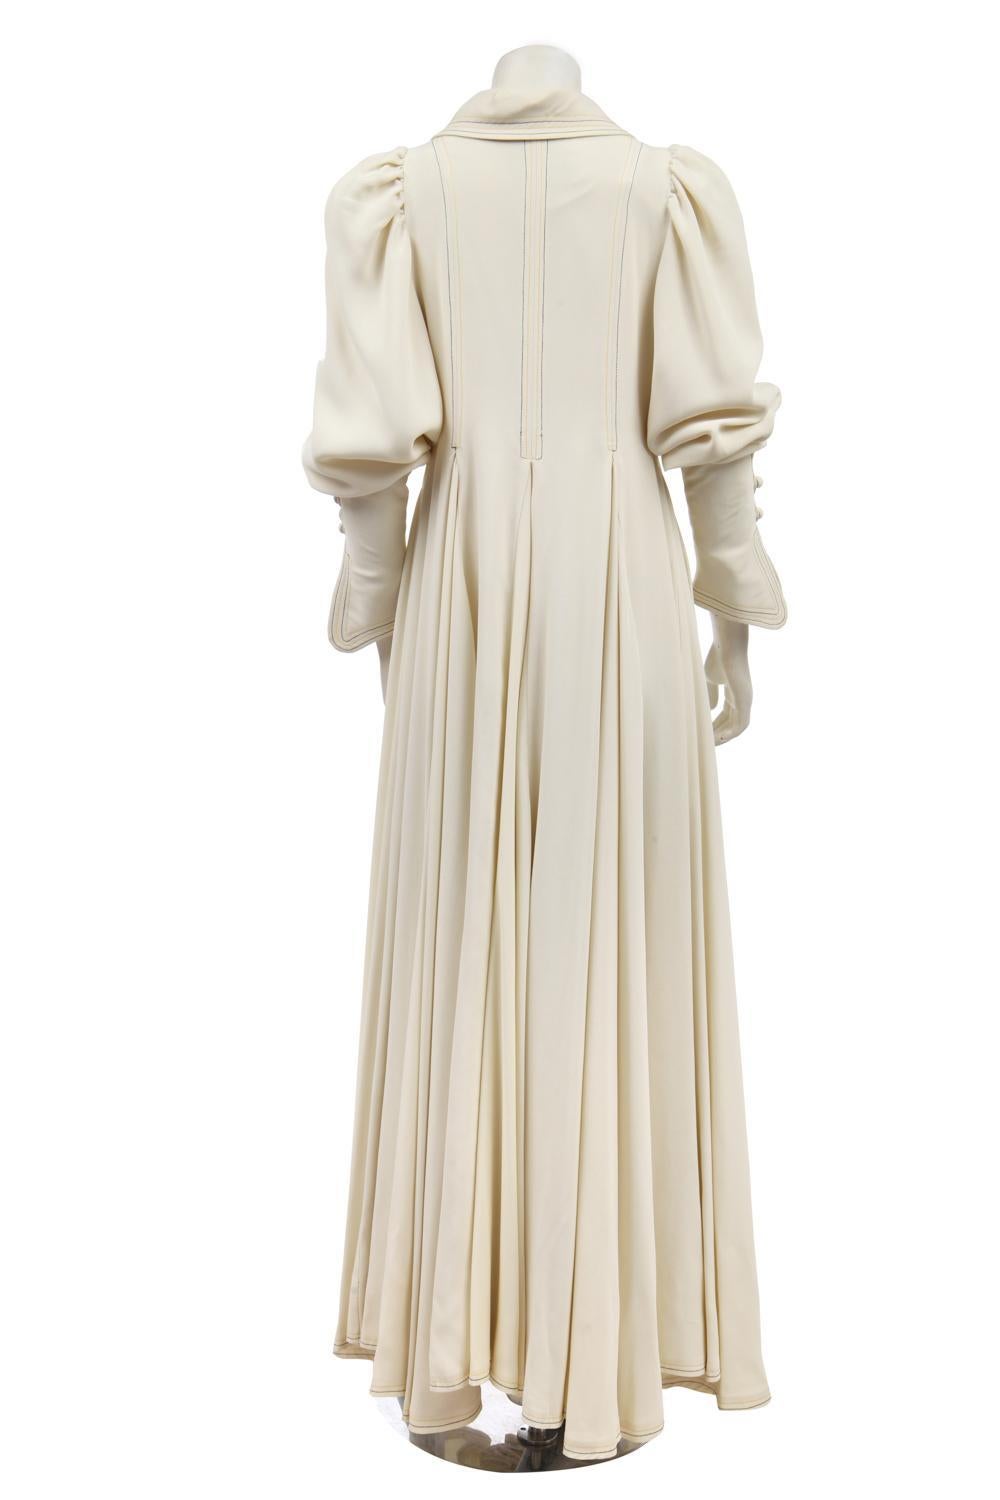 Women's Bill Gibb F/W 1972 Ivory Moss Crepe Gown For Sale